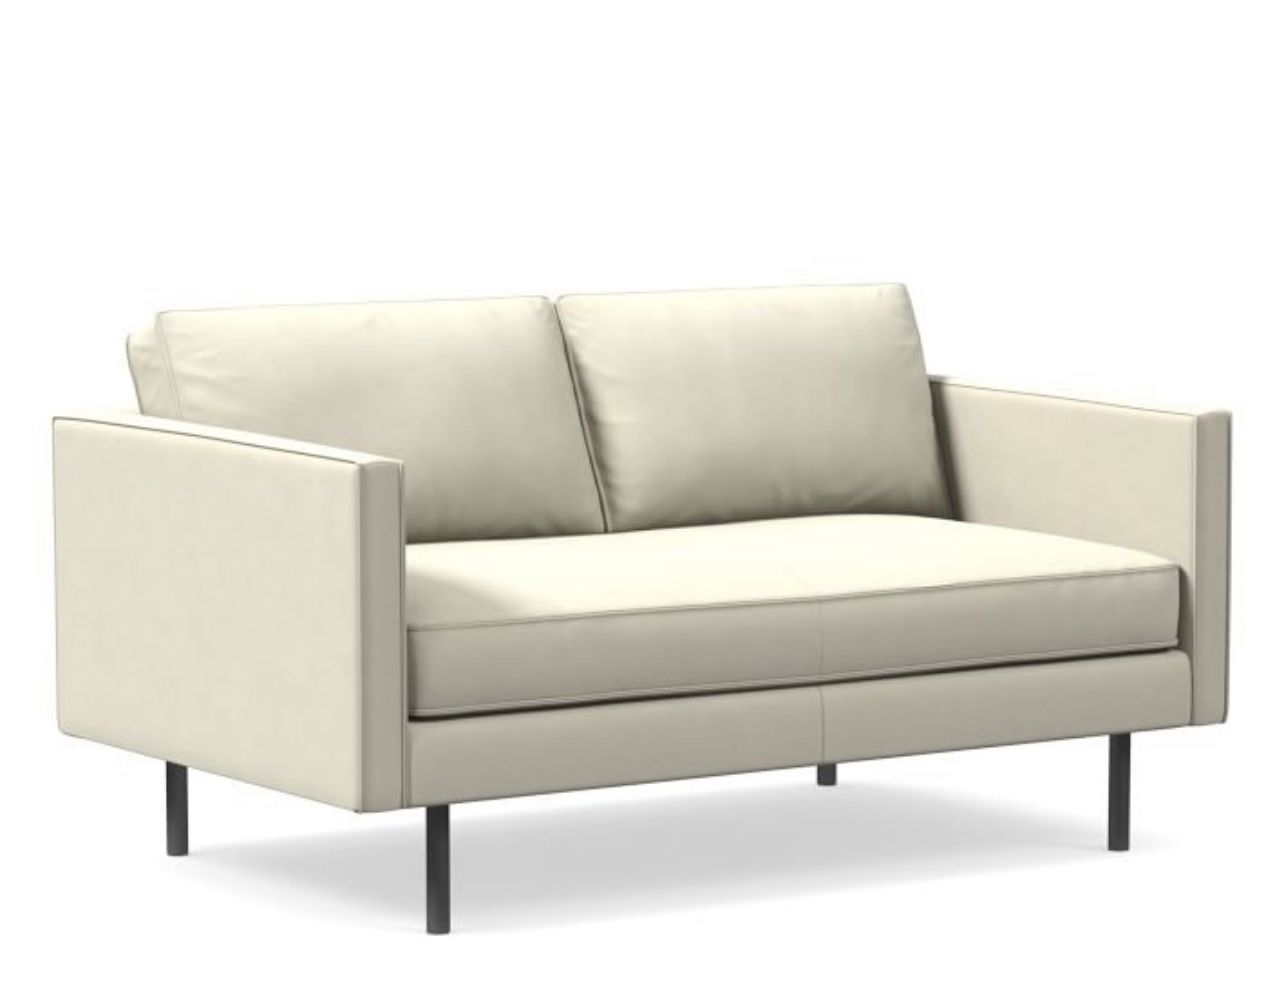 West Elm Axel Leather Sofa (2 Available)